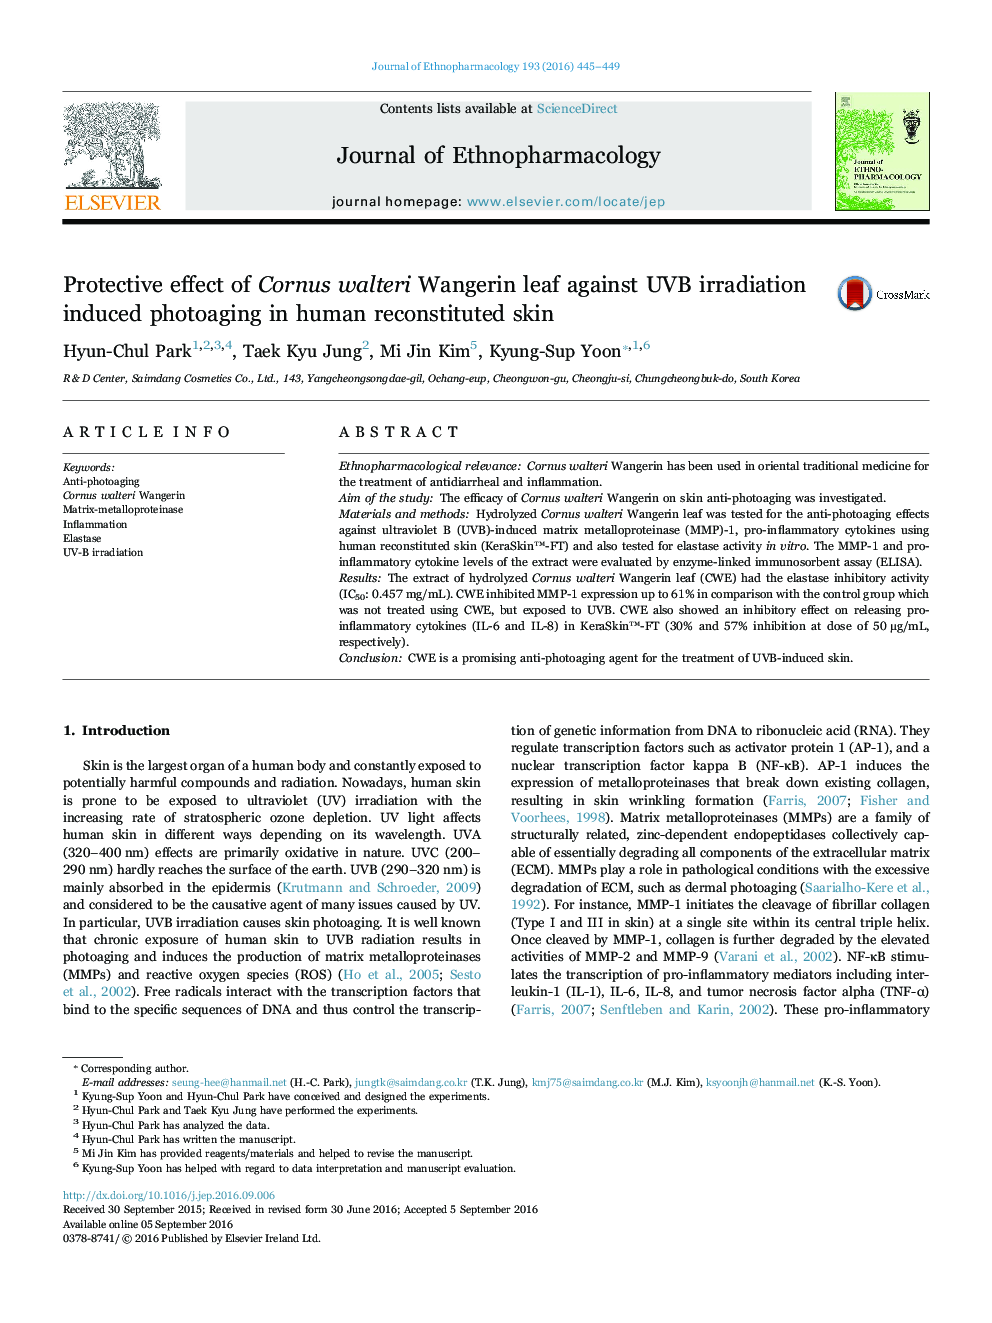 Protective effect of Cornus walteri Wangerin leaf against UVB irradiation induced photoaging in human reconstituted skin